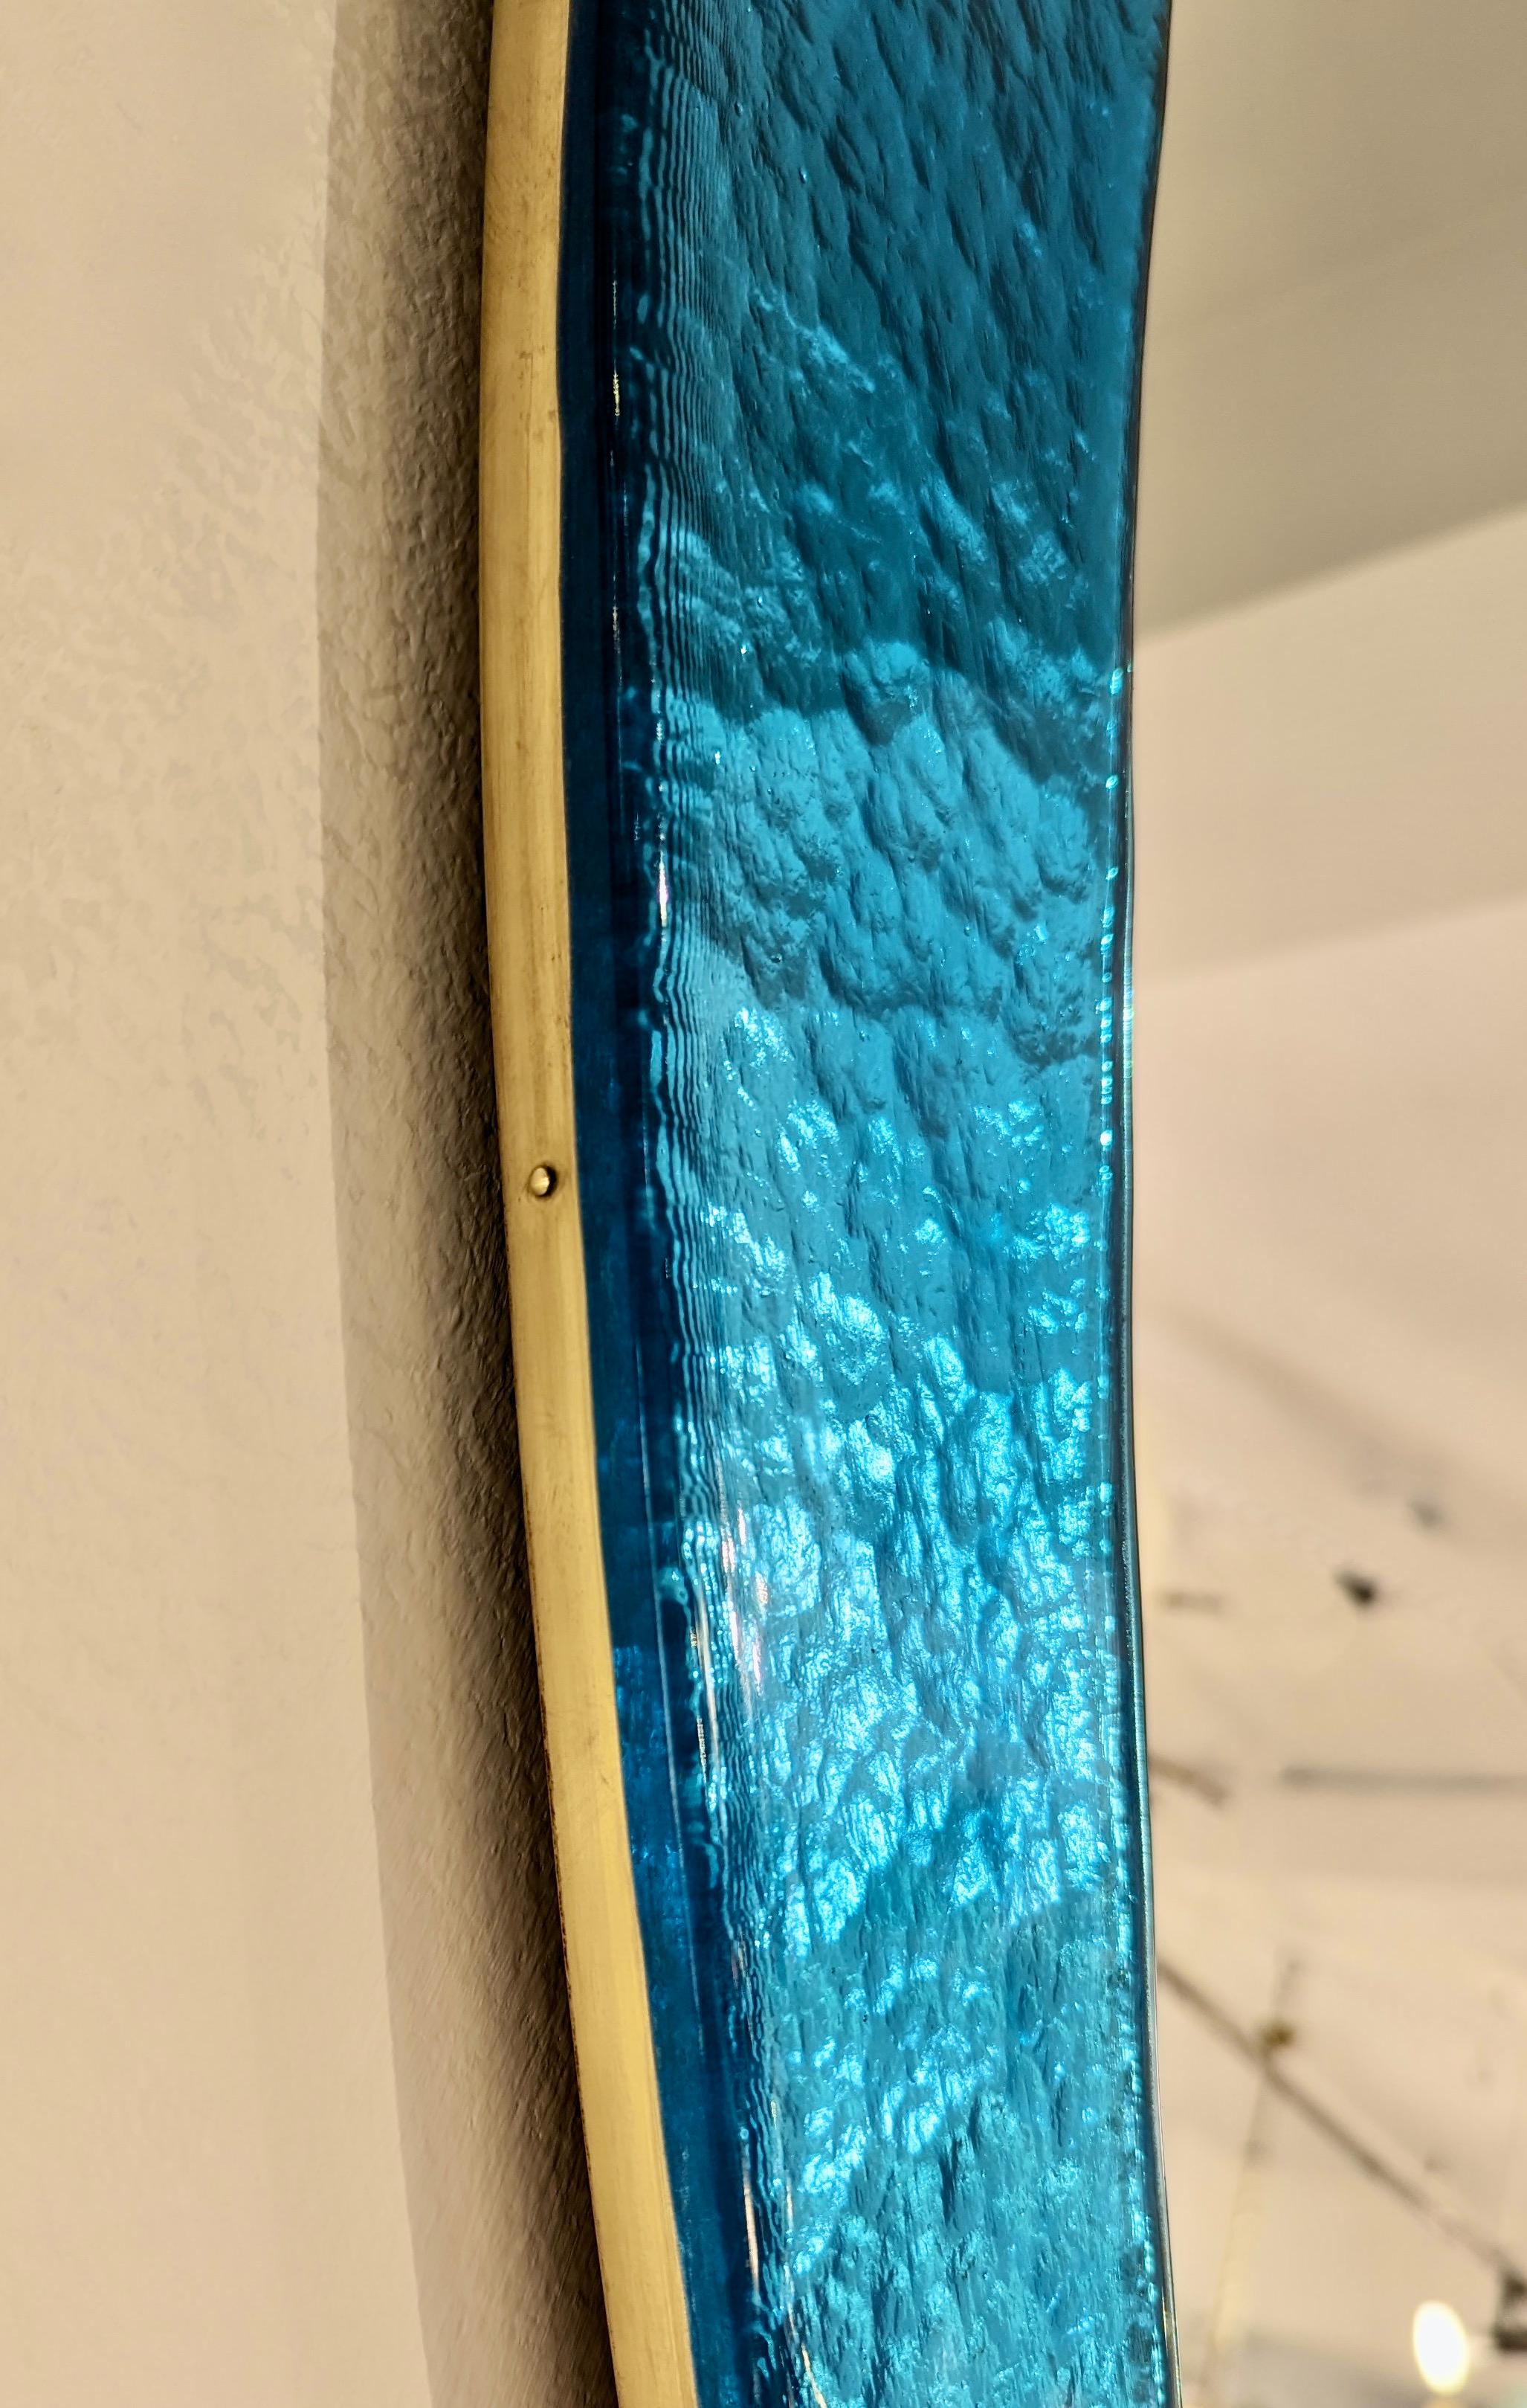 Contemporary custom-made modern mirror, entirely hand-made in Italy, of organic stylized kite shape, that can be displayed horizontally or vertically. Of unique Memphis-inspired design, this Art glass mirror has 4 destructured curved sides, in blown